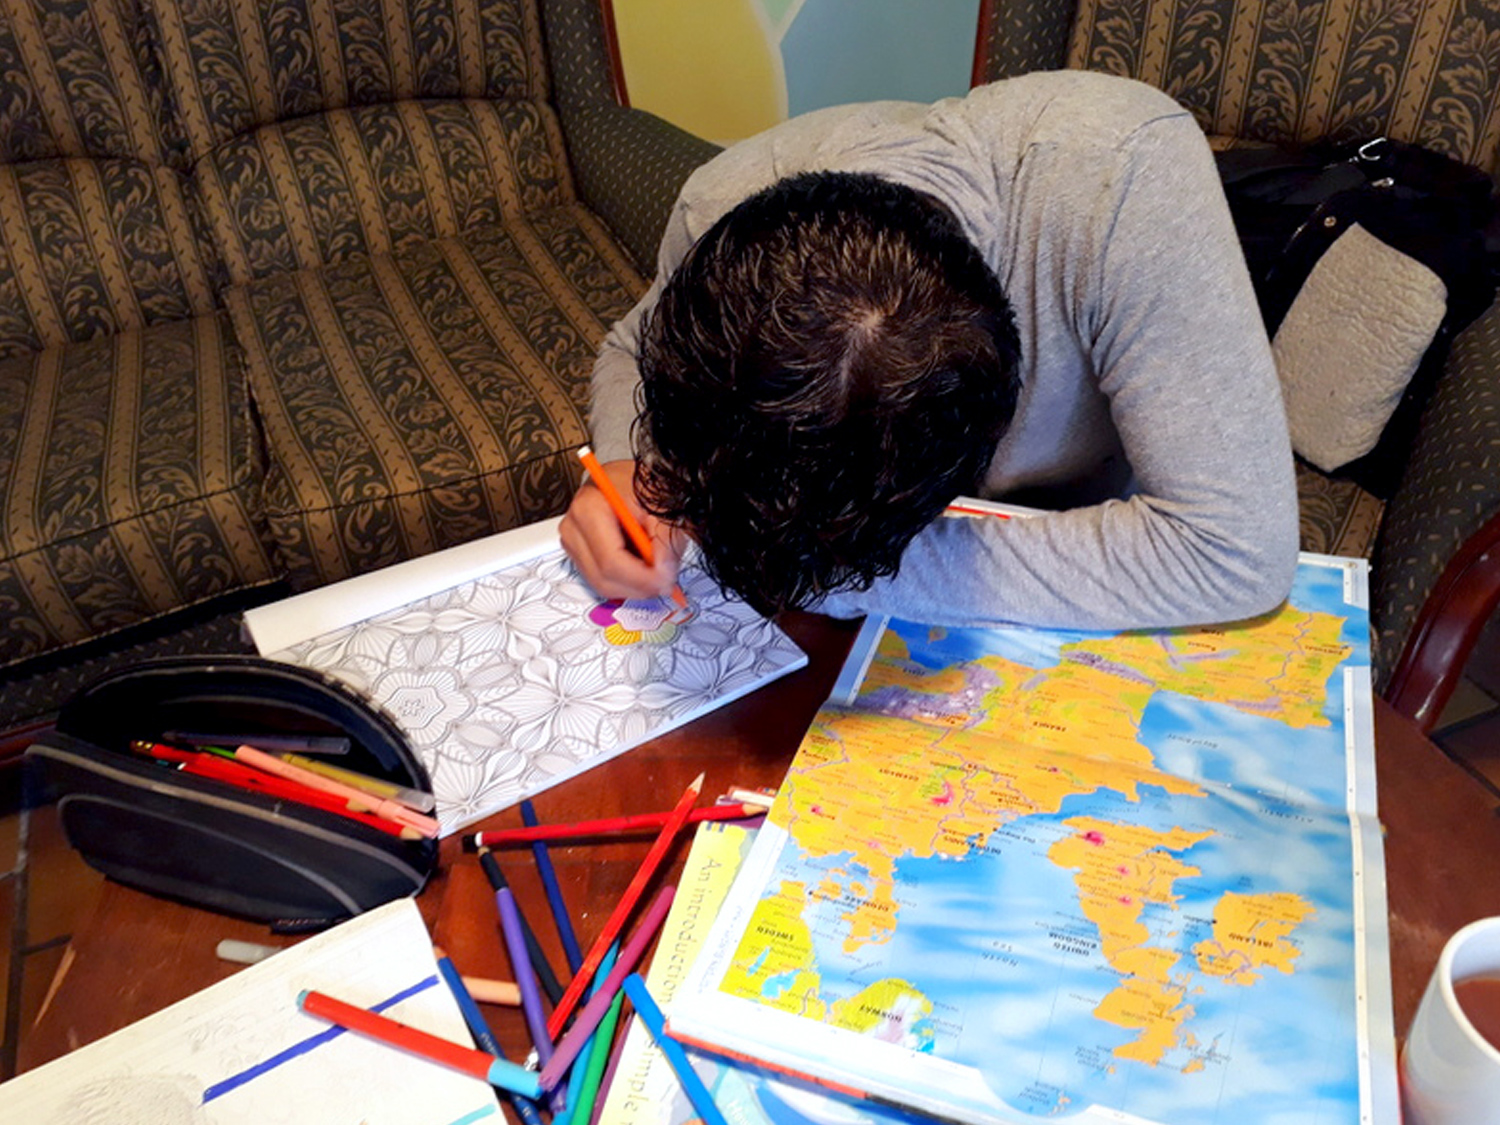 Child colouring in with a map of Europe